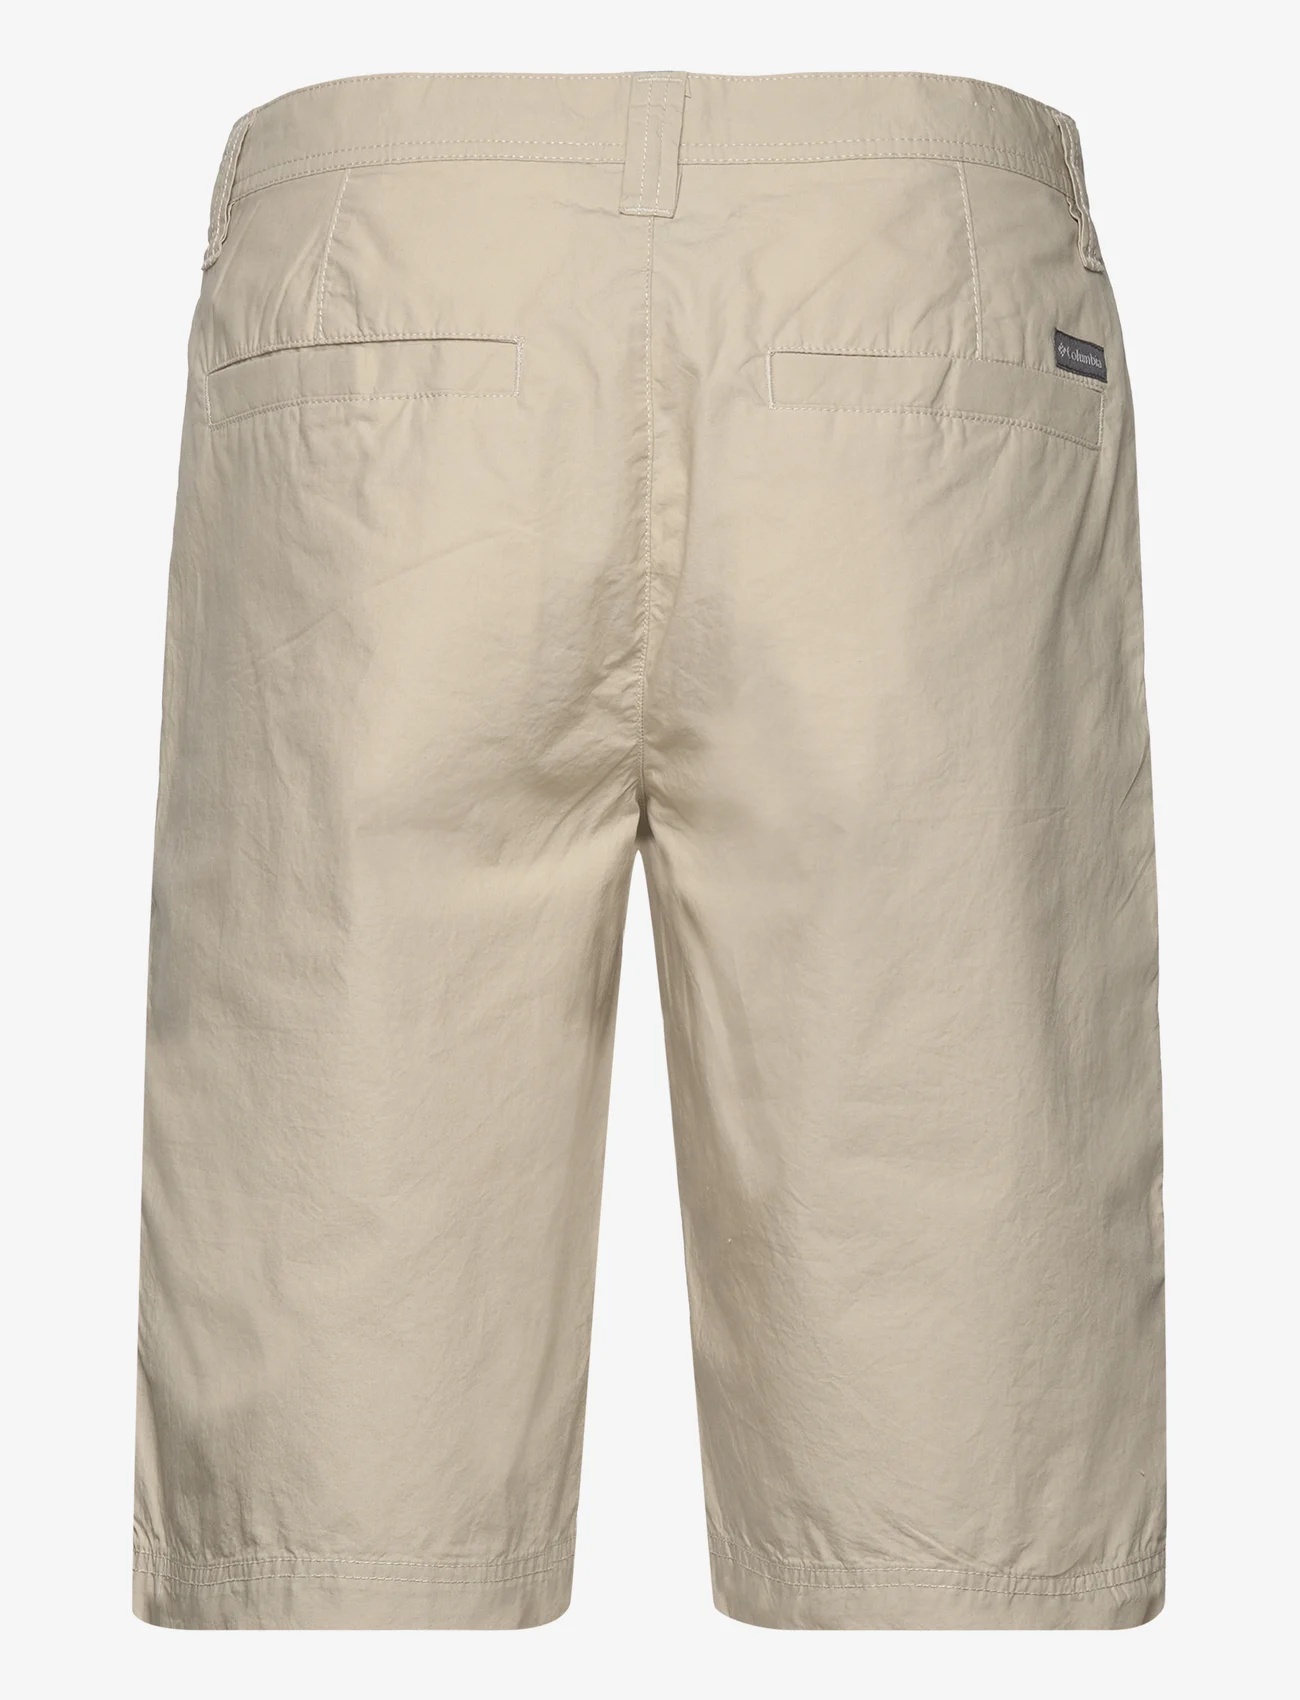 Columbia Sportswear - Washed Out Short - friluftsshorts - fossil - 1